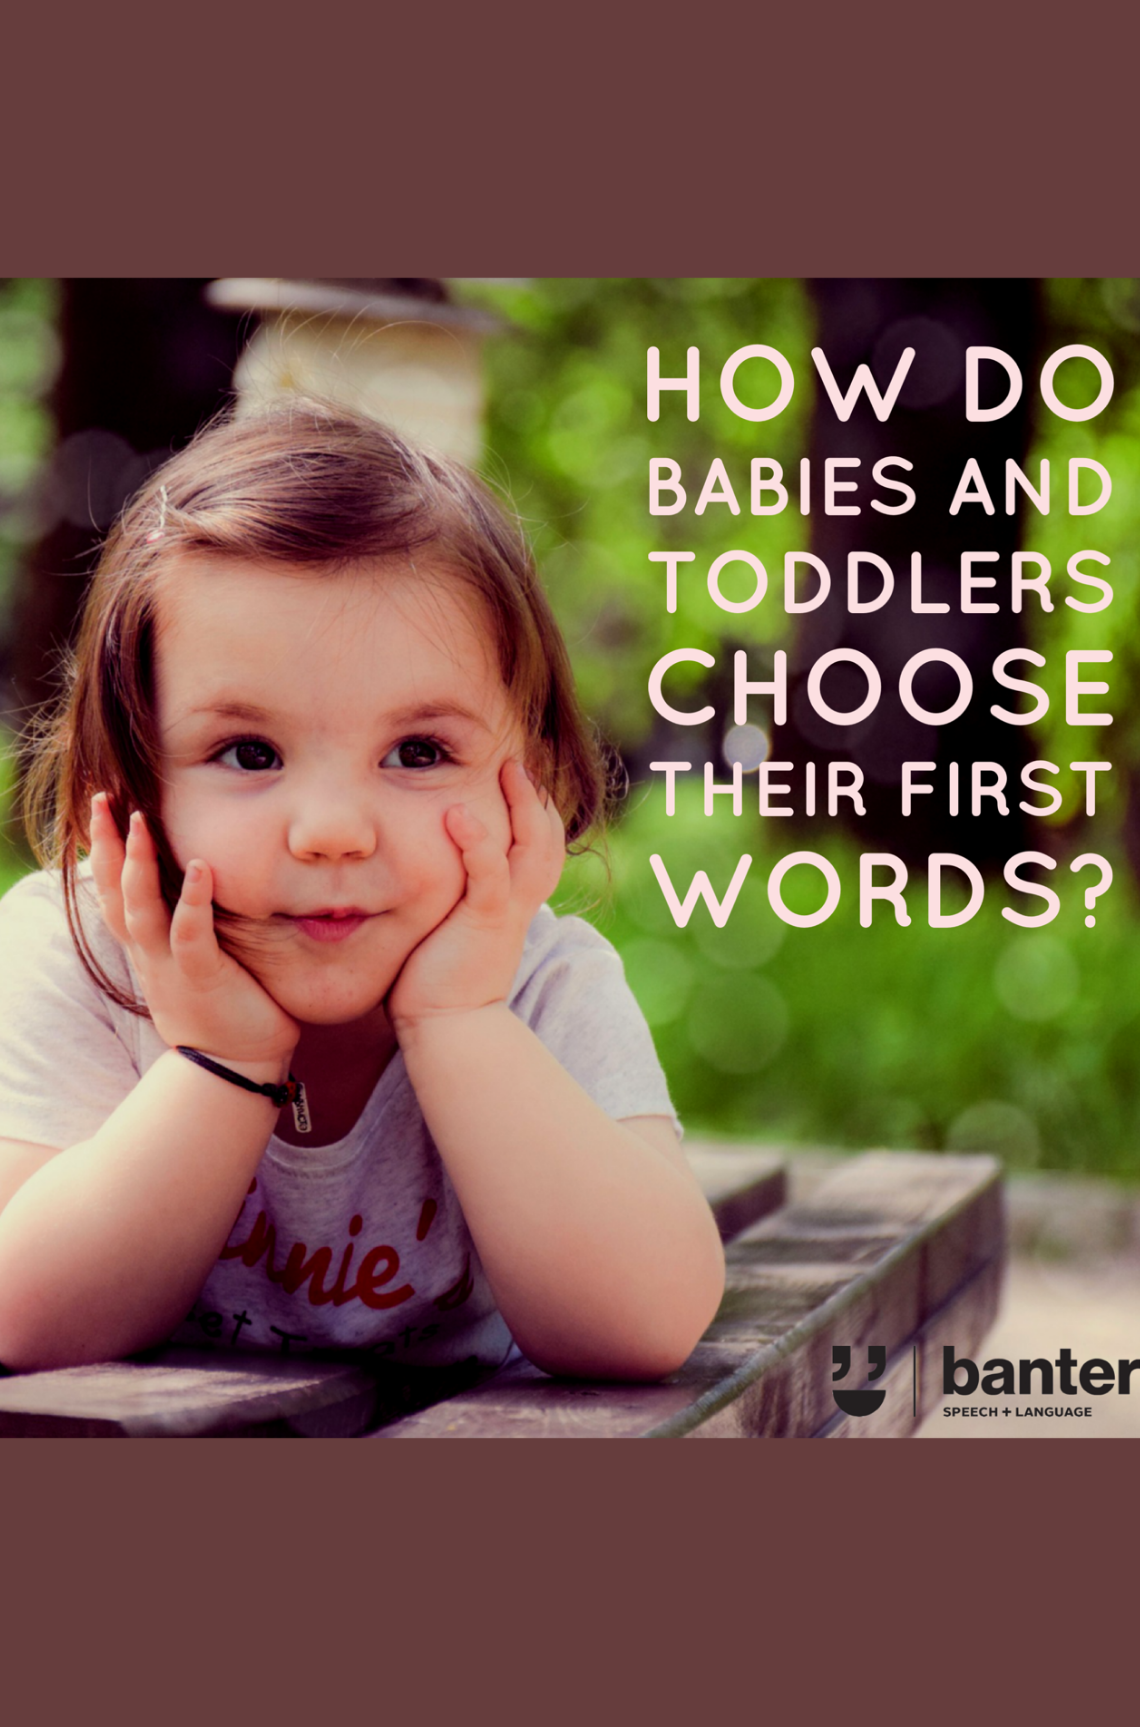 How do babies and toddlers choose their first words?